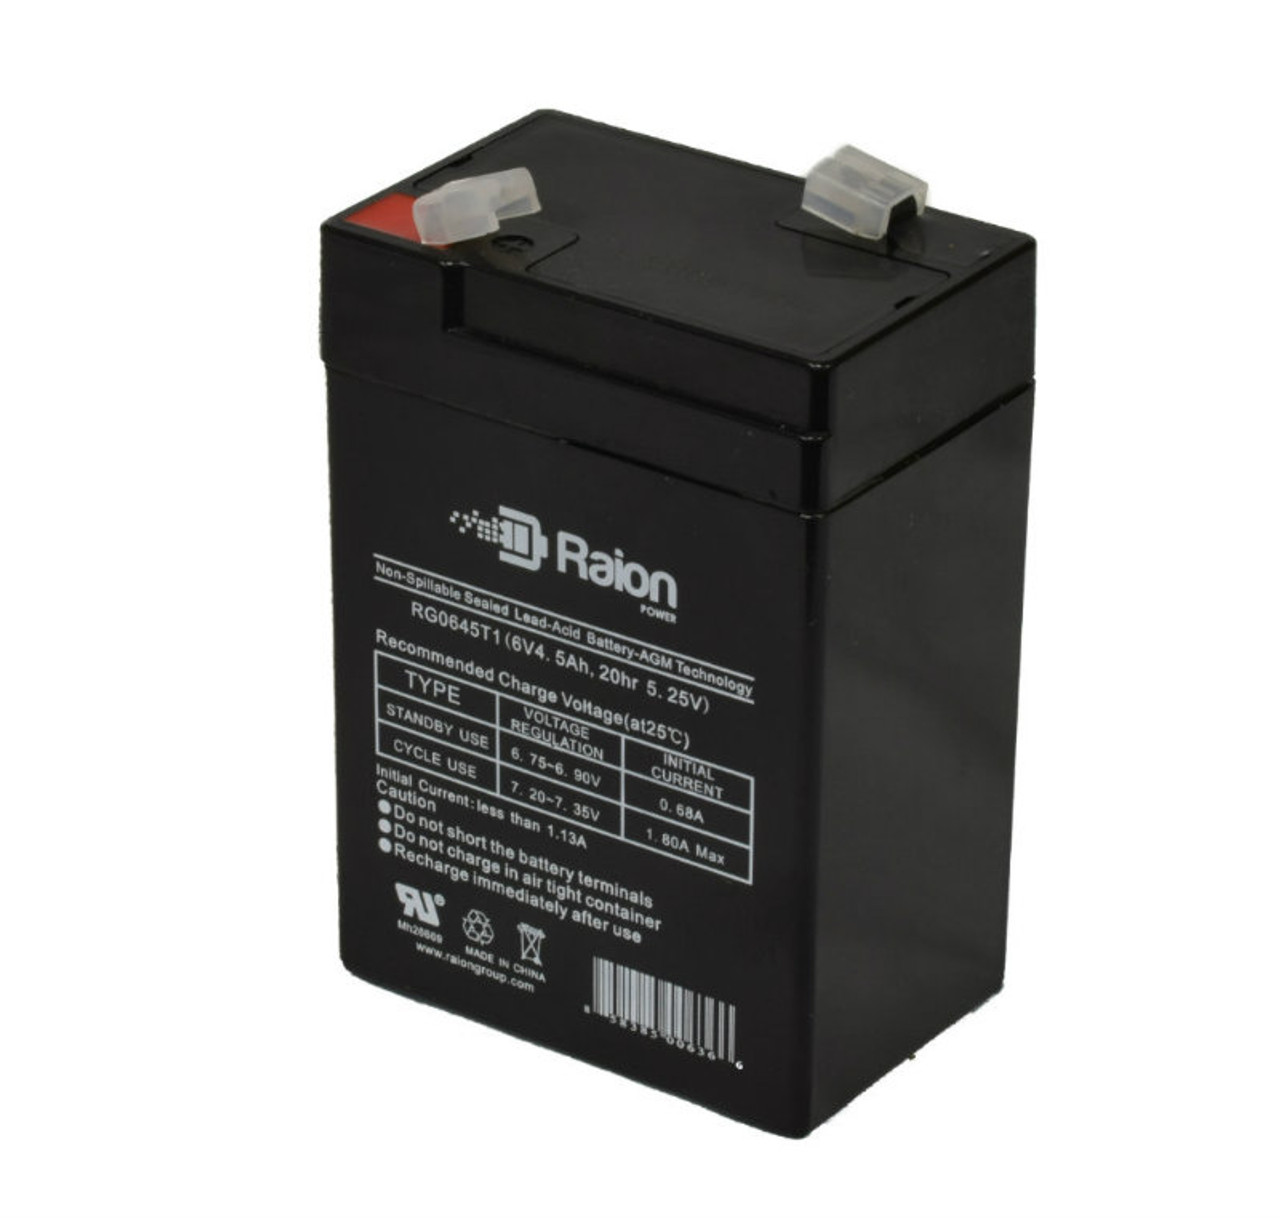 Raion Power RG0645T1 6V 4.5Ah Replacement Battery Cartridge for Discover D650